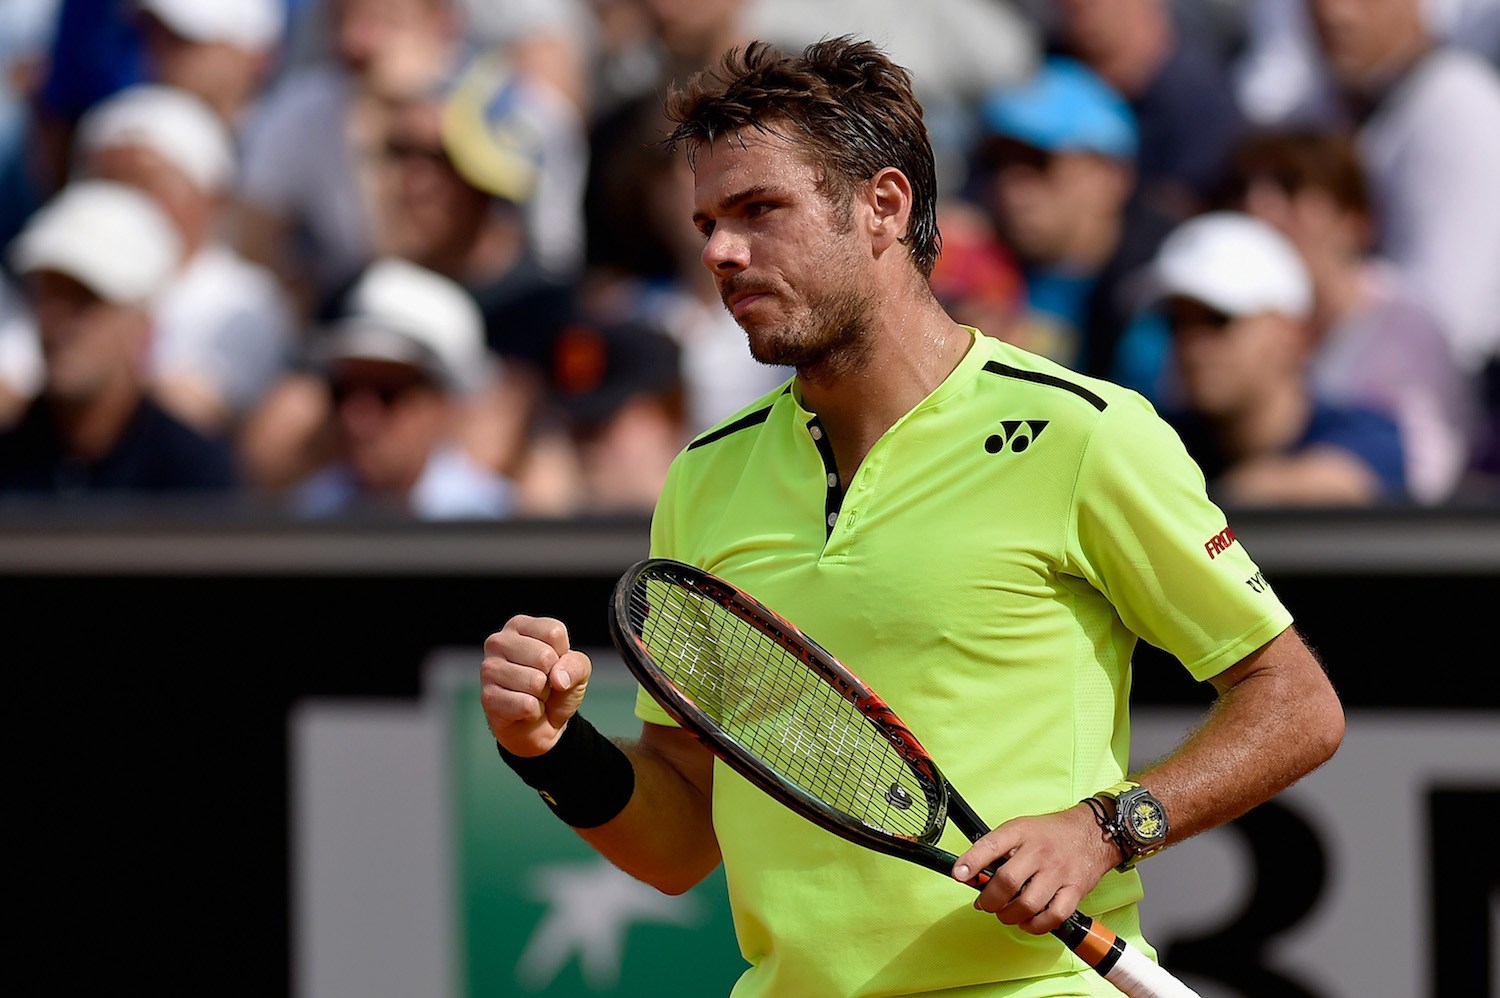 Stan Wawrinka plans on playing in the Madrid Masters event | Tennis.com